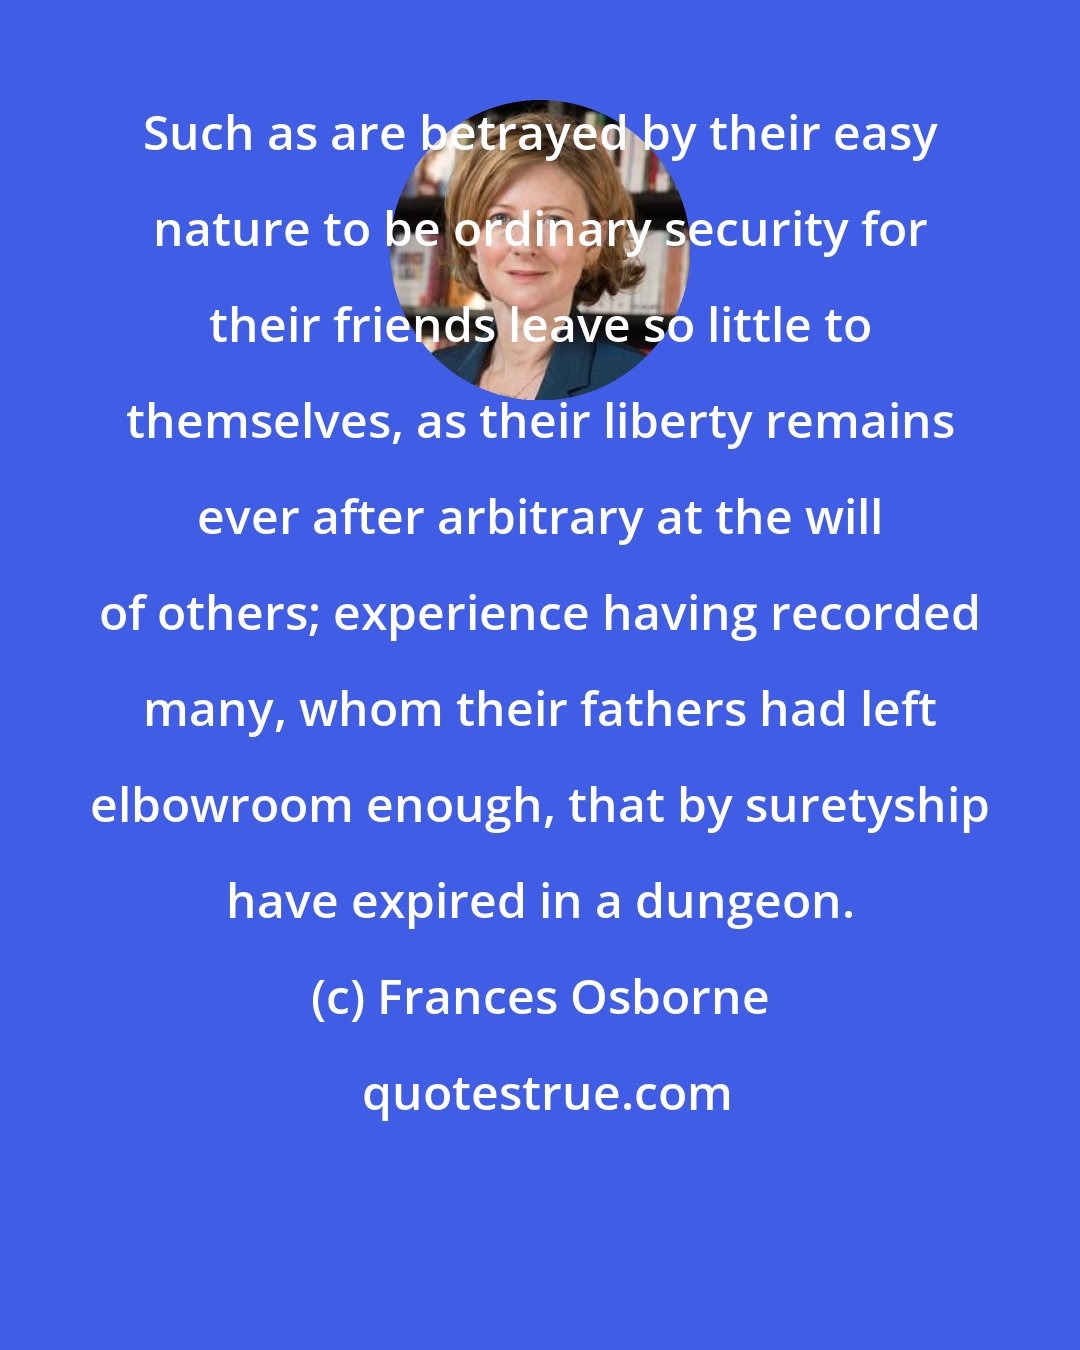 Frances Osborne: Such as are betrayed by their easy nature to be ordinary security for their friends leave so little to themselves, as their liberty remains ever after arbitrary at the will of others; experience having recorded many, whom their fathers had left elbowroom enough, that by suretyship have expired in a dungeon.